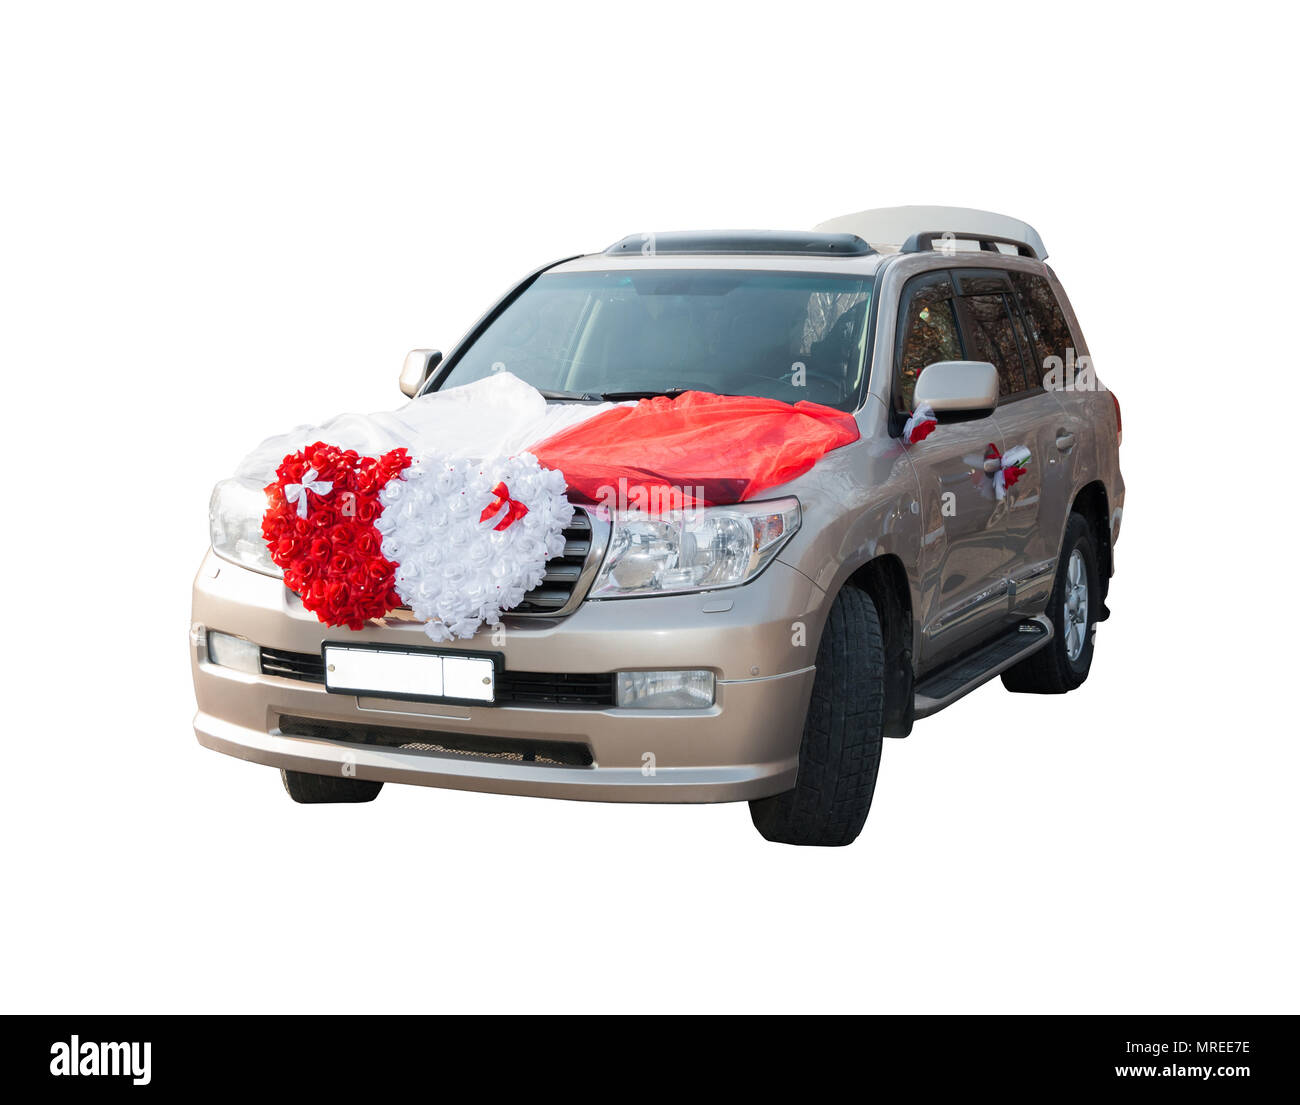 The wedding car decorated with flowers on a white background. Stock Photo